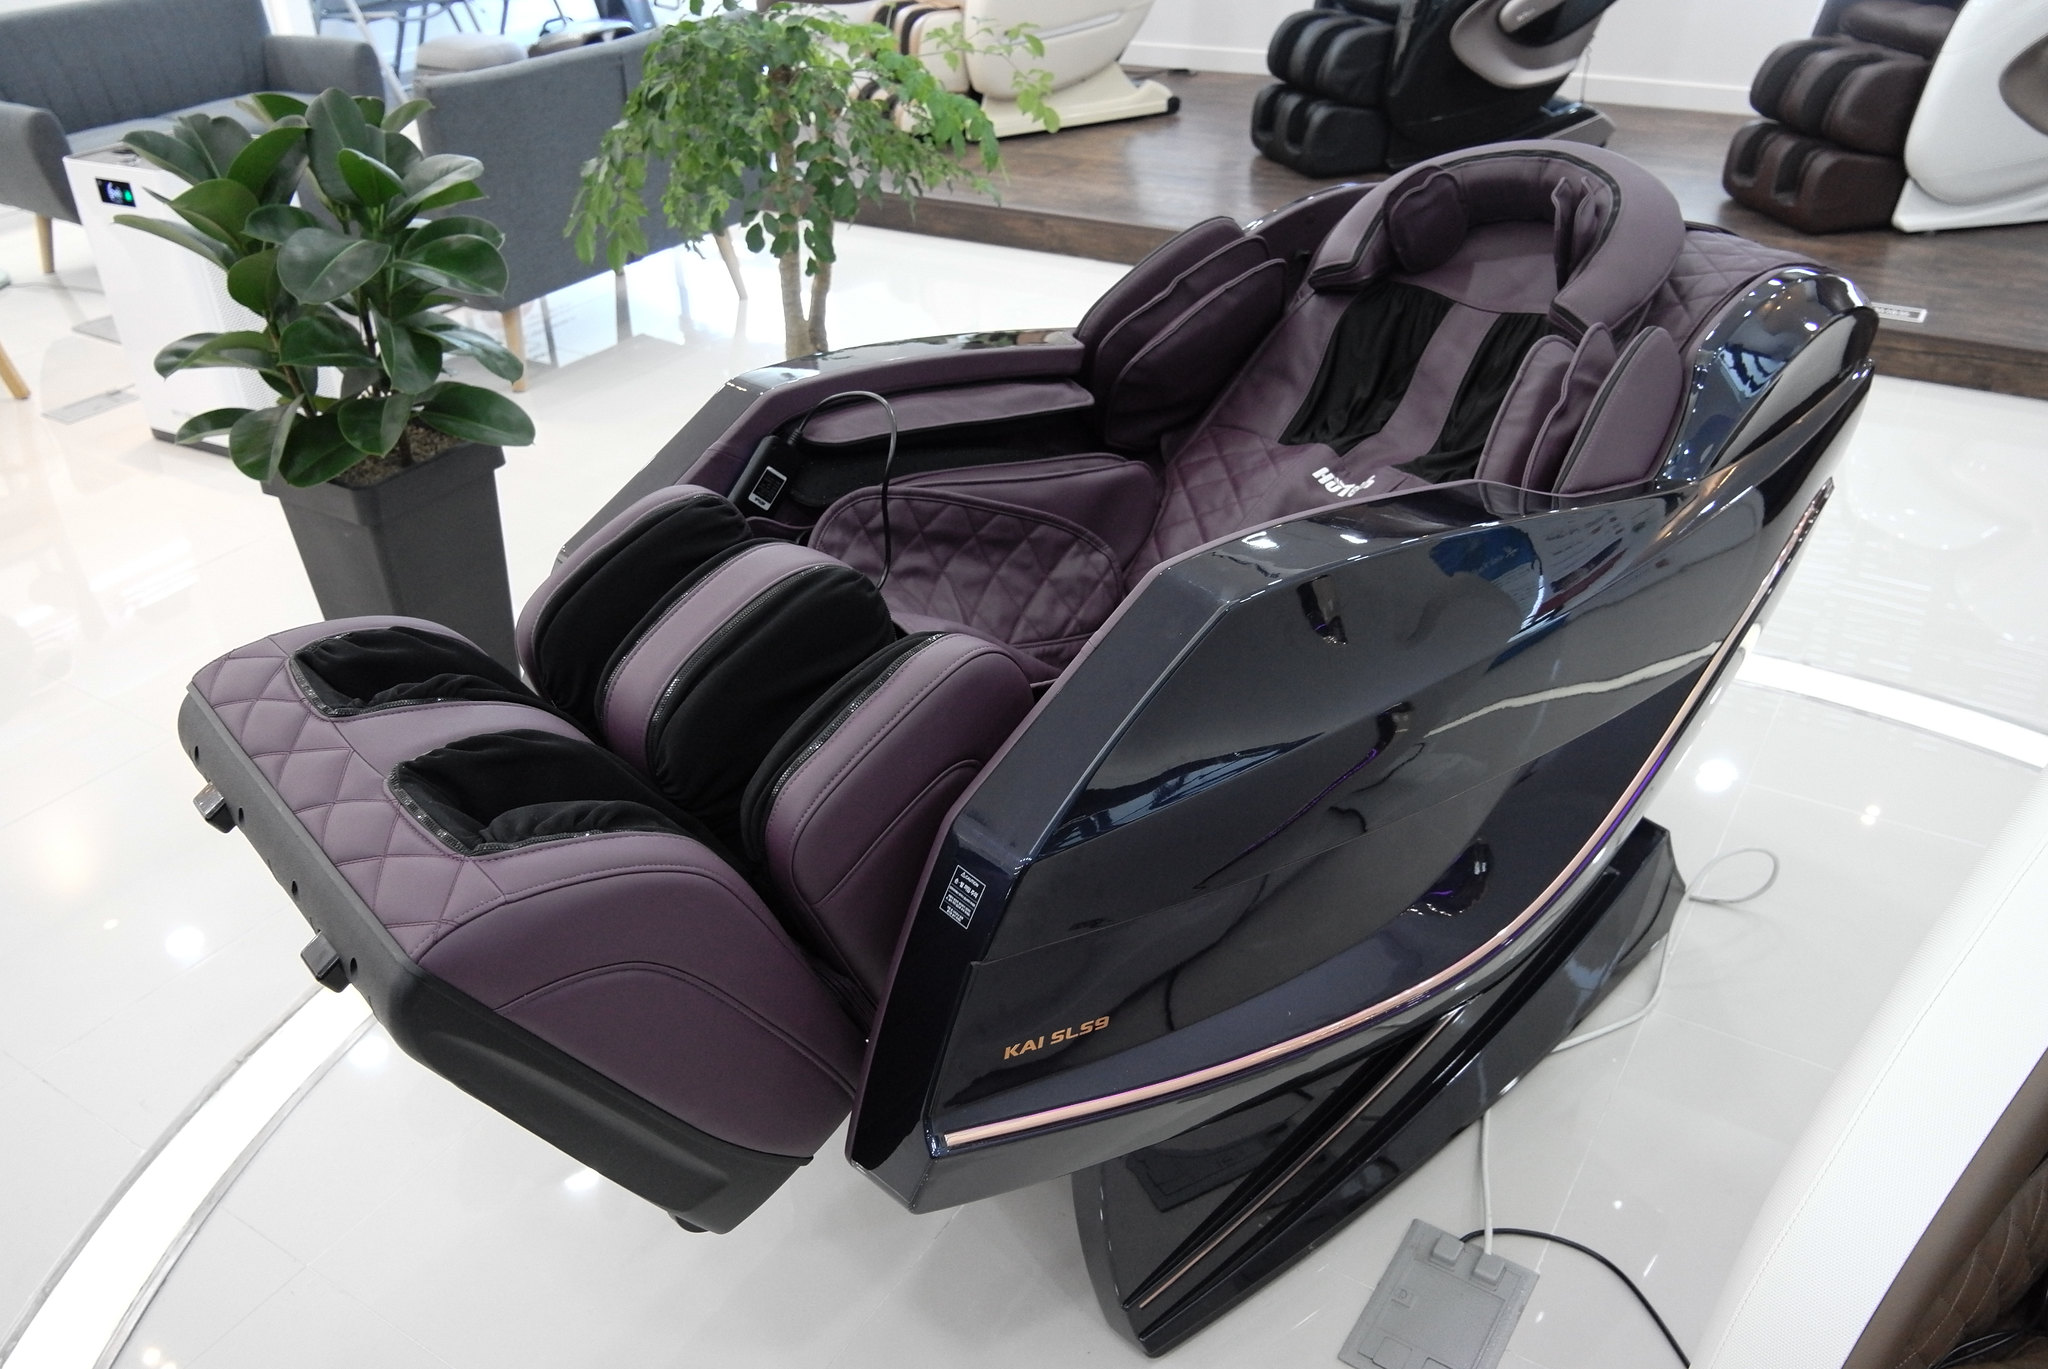 image - How to Find the Best Massage Chair Melbourne Has to Offer